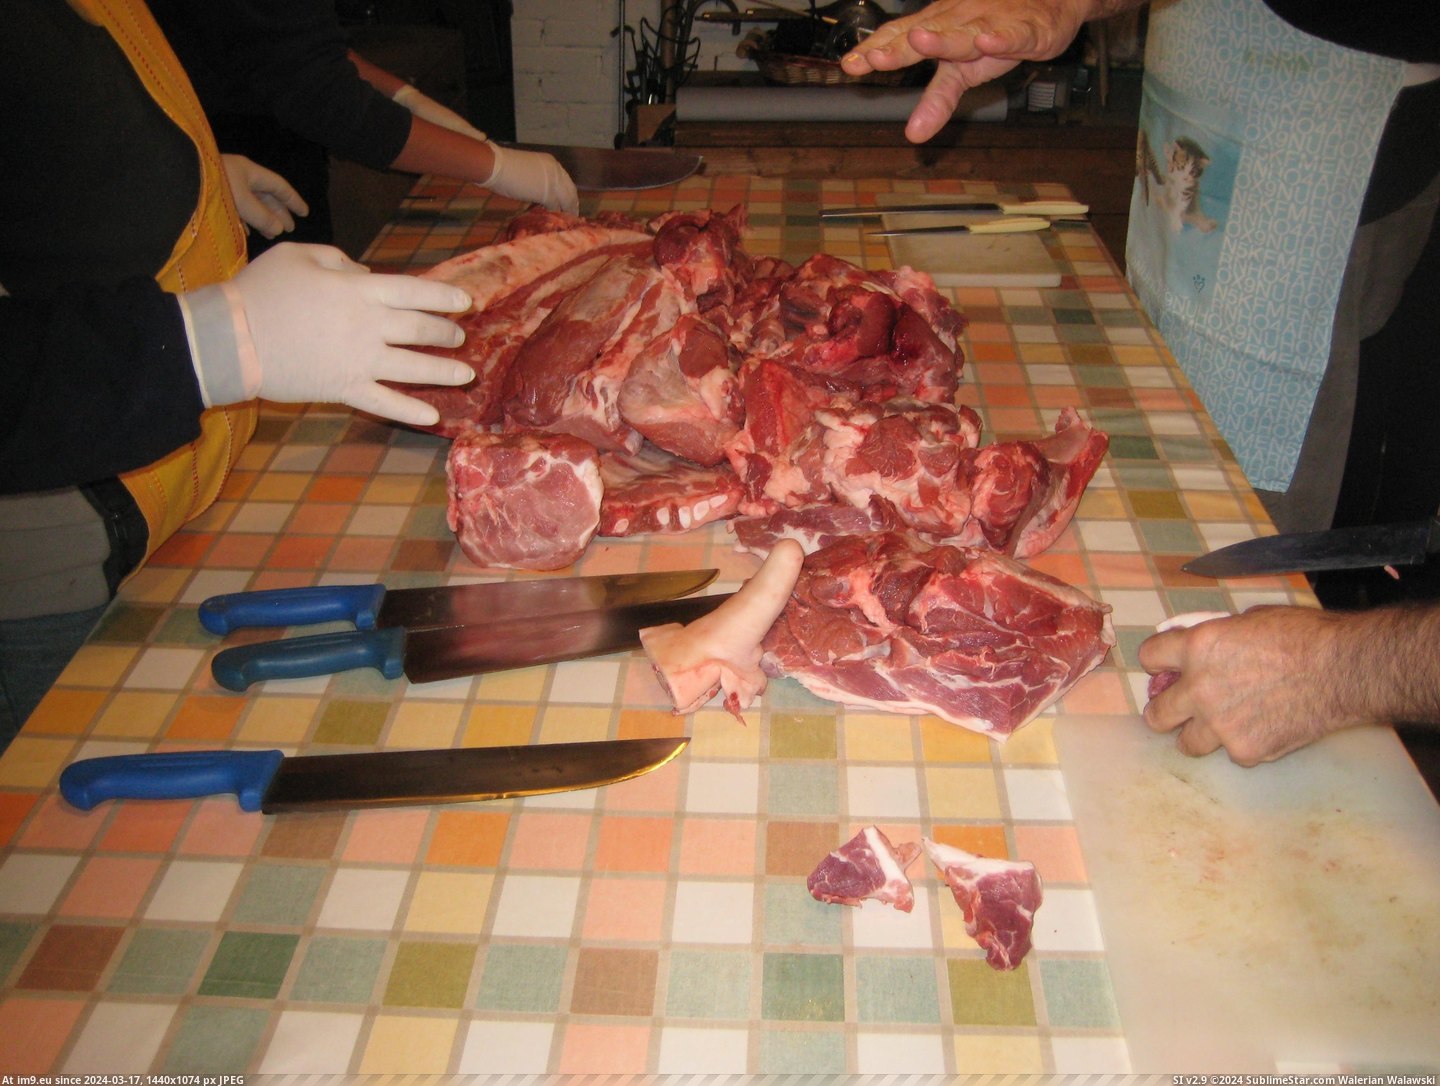 #Making #Homemade #Italy [Pics] Making homemade salami in Italy 25 Pic. (Image of album My r/PICS favs))